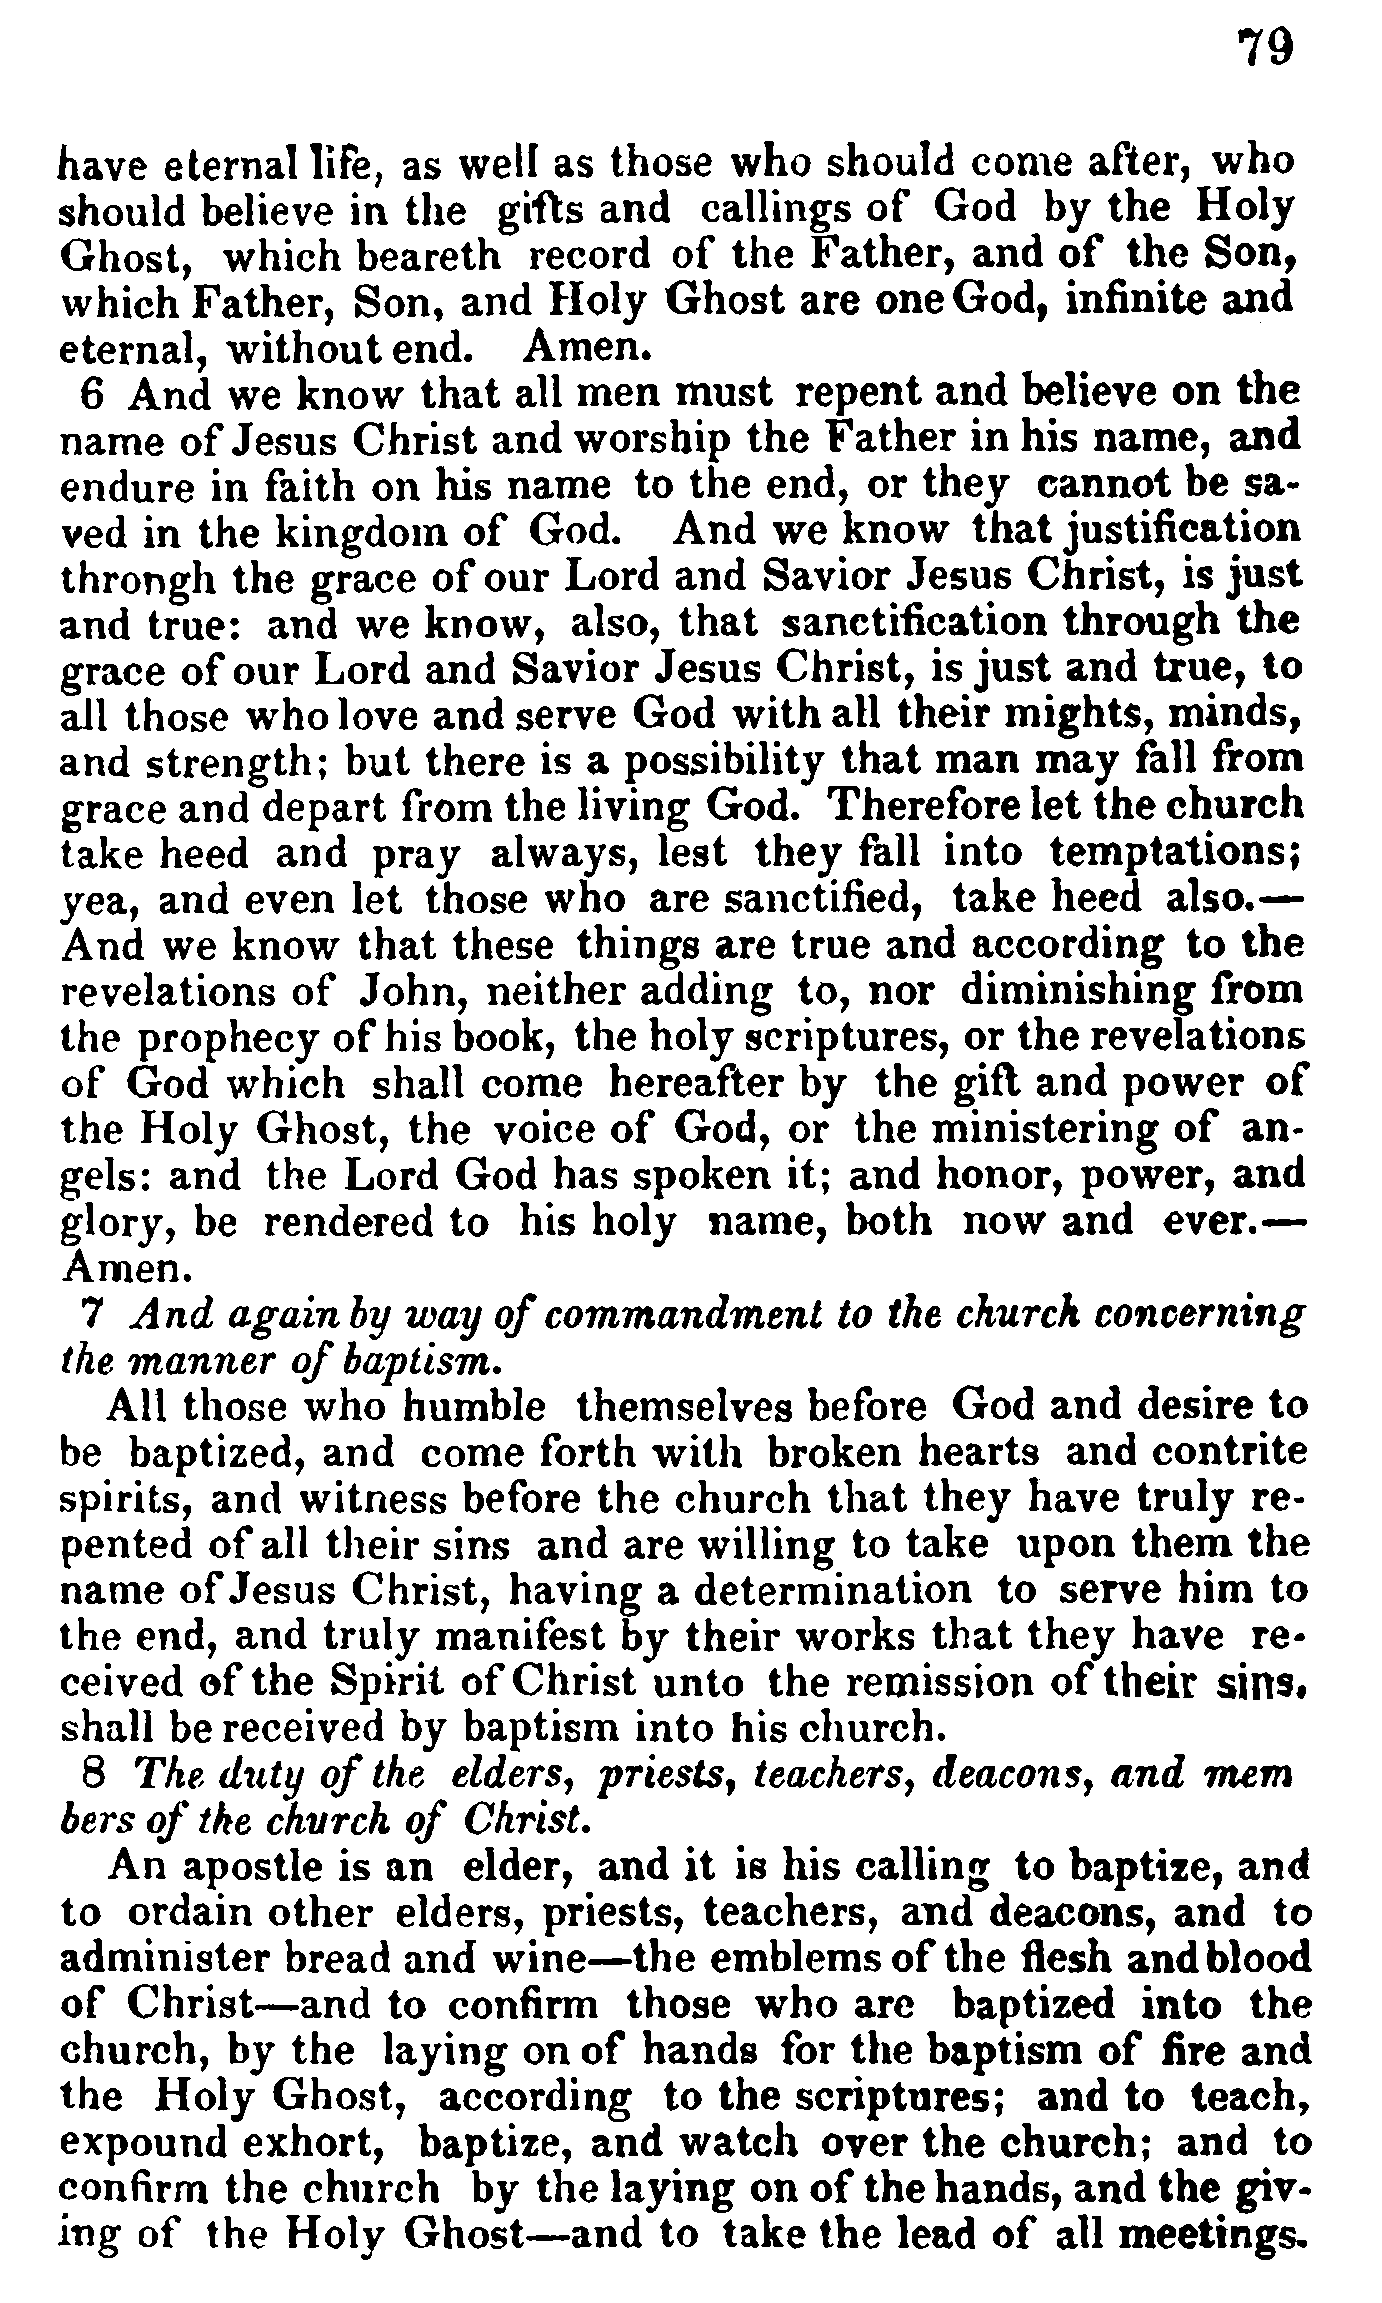 Doctrine and Covenants 1835 edition p.79